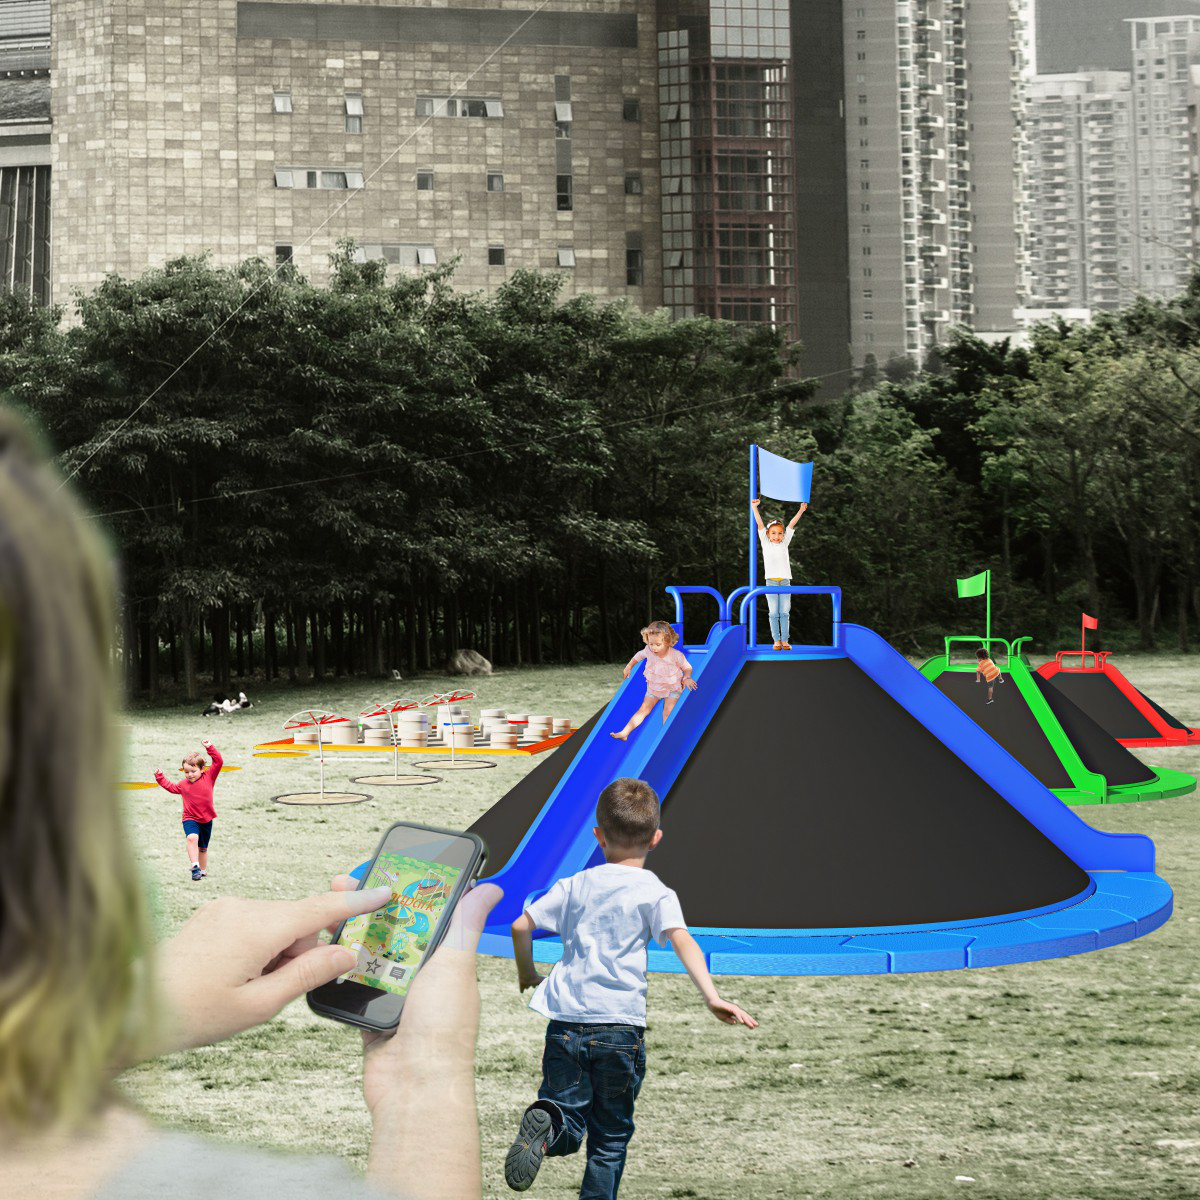 Smartpark System Proposal for Outdoor Playgrounds by Nimet Basar Kesdi